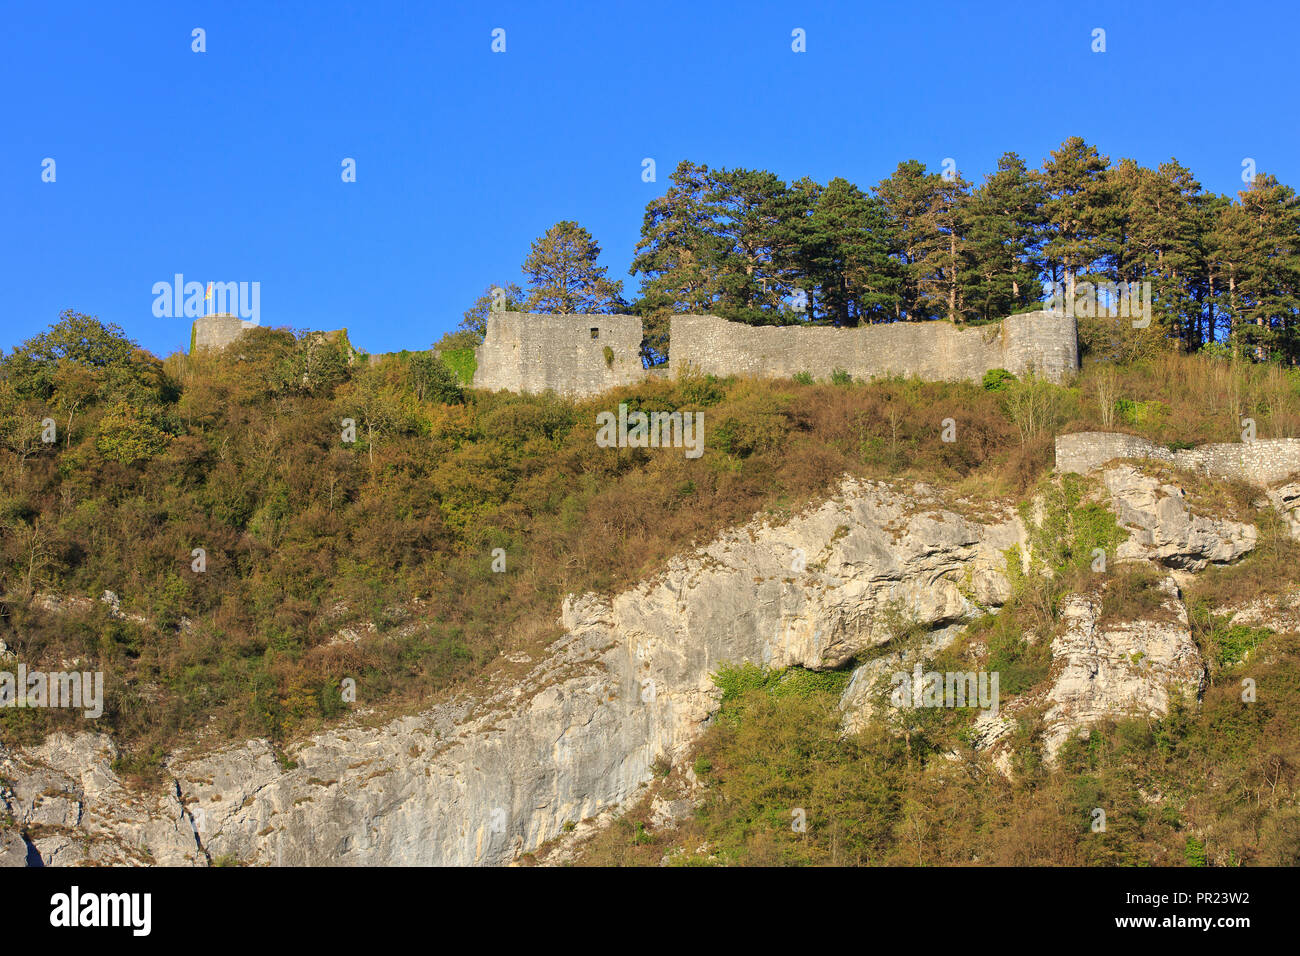 The 15th-century ruins of Poilvache Castle in Yvoir (province of Namur), Belgium Stock Photo